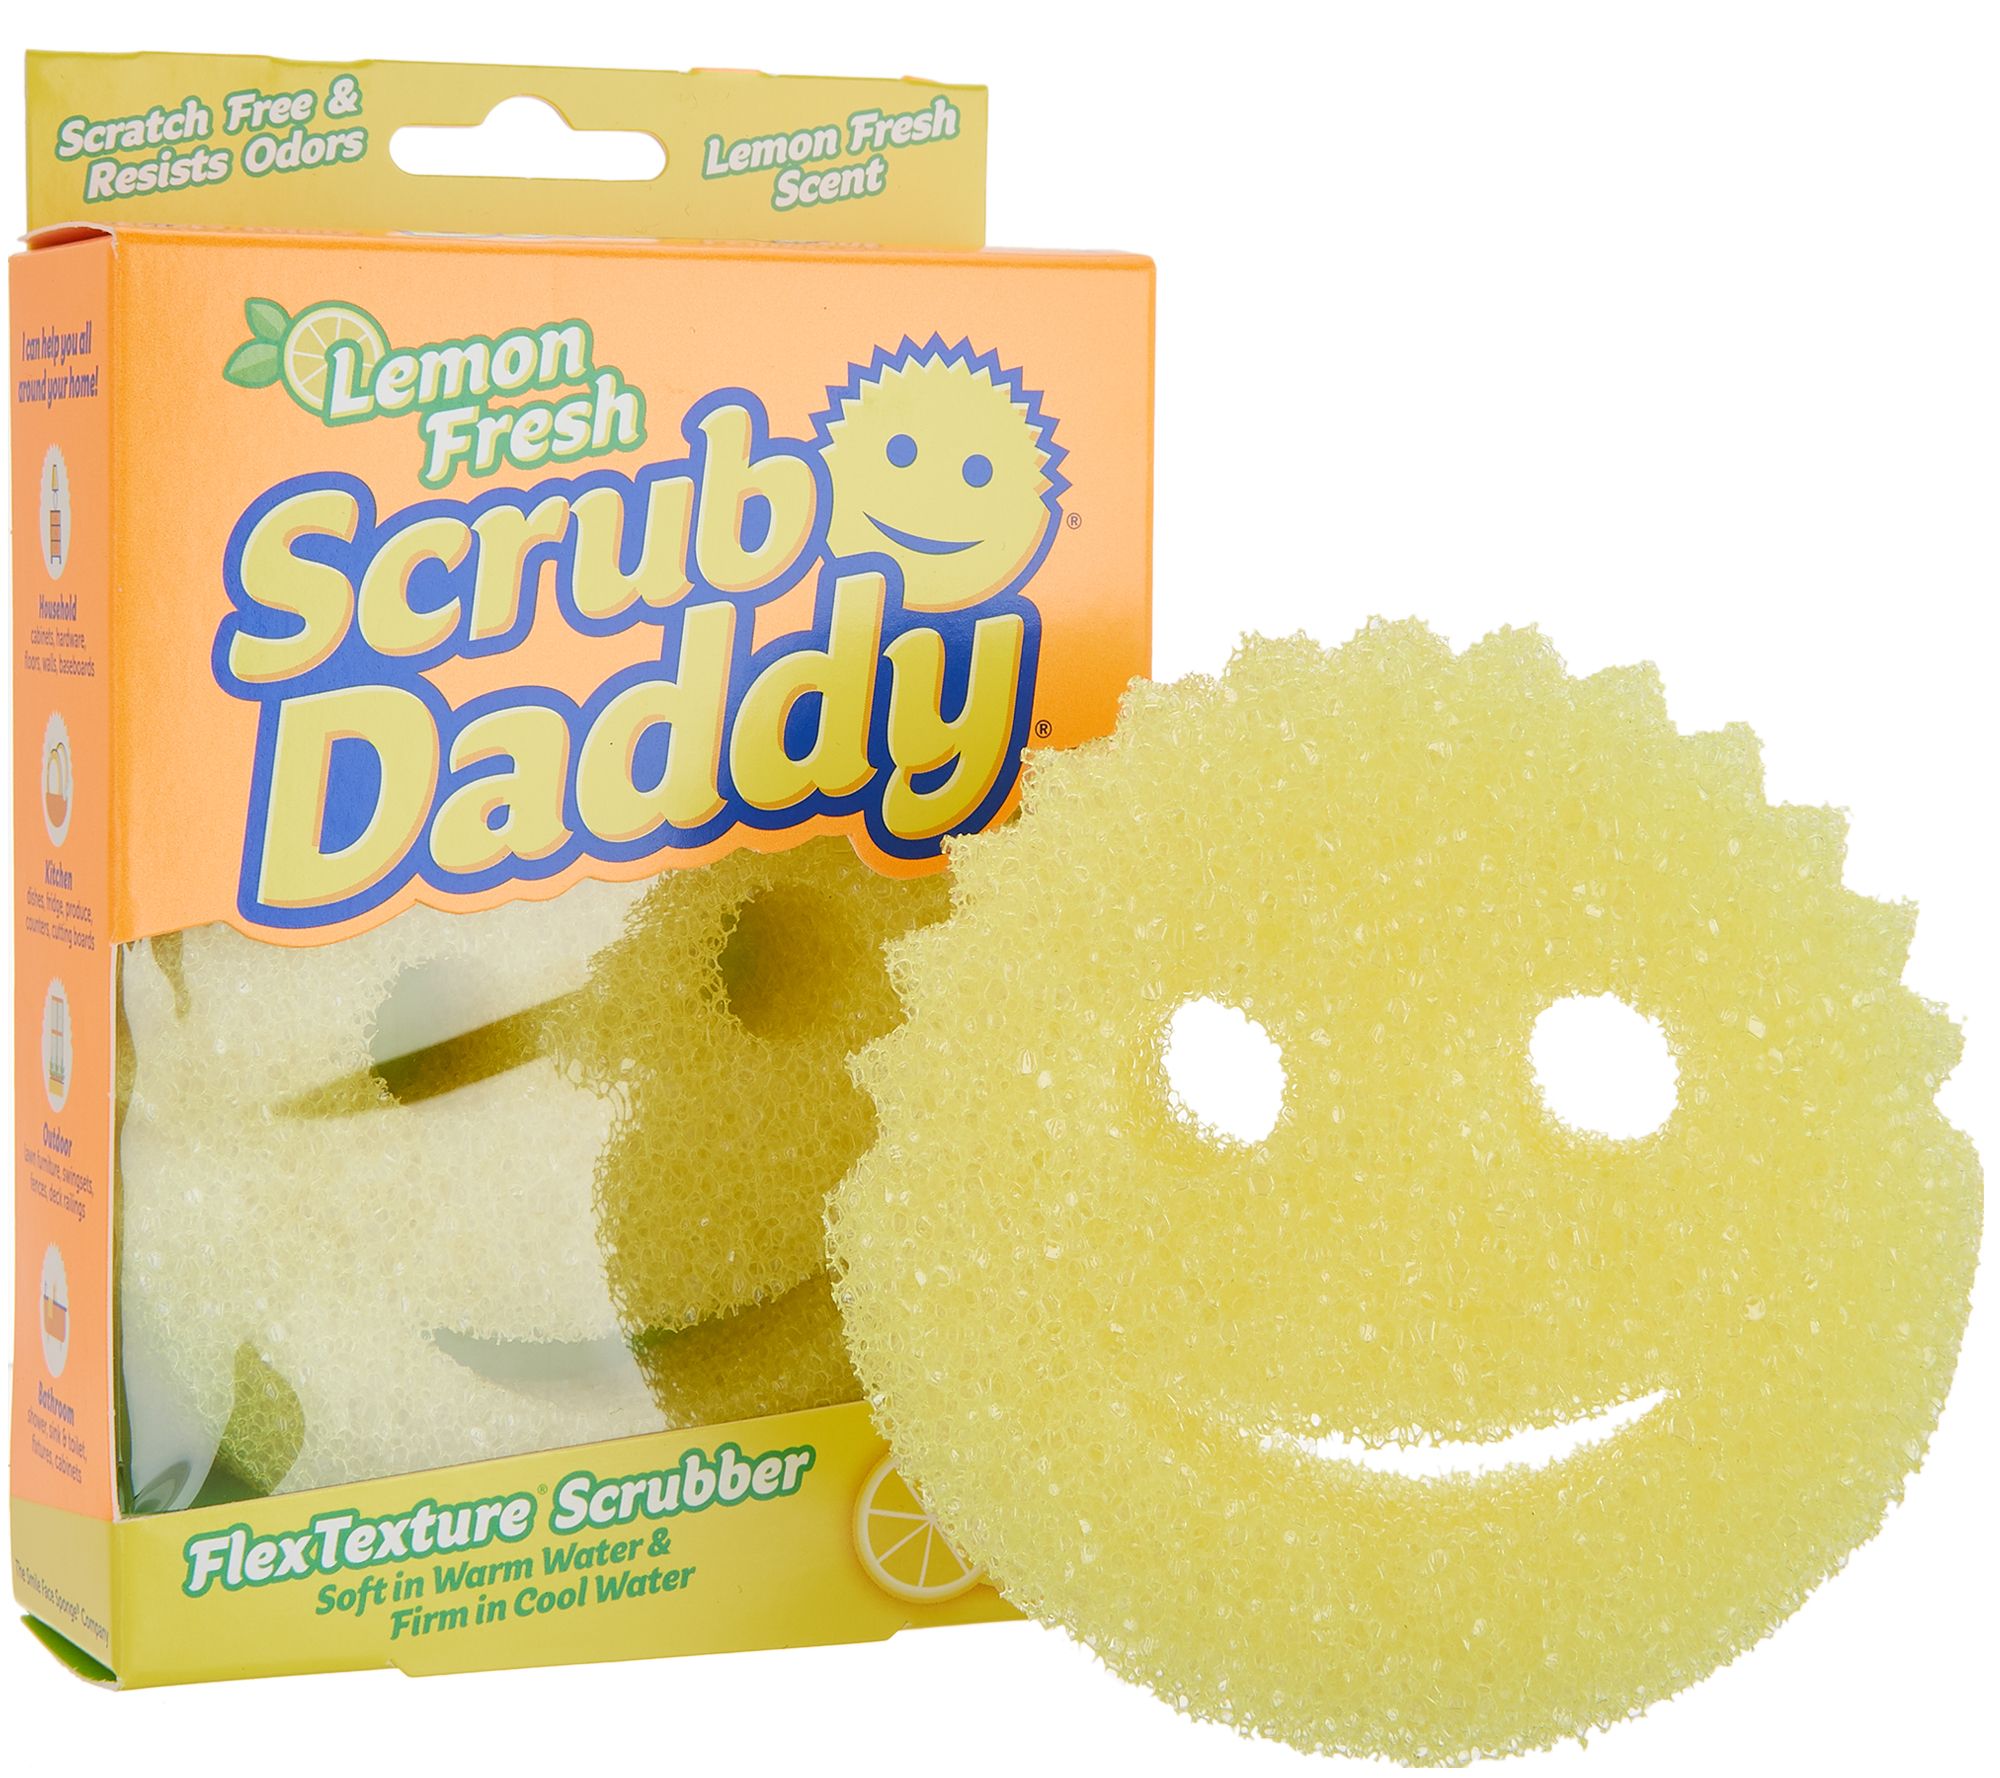 Scrub Daddy Non-Scratch Sponge Easy grip pack of 1 Yellow, Best Holiday Gift